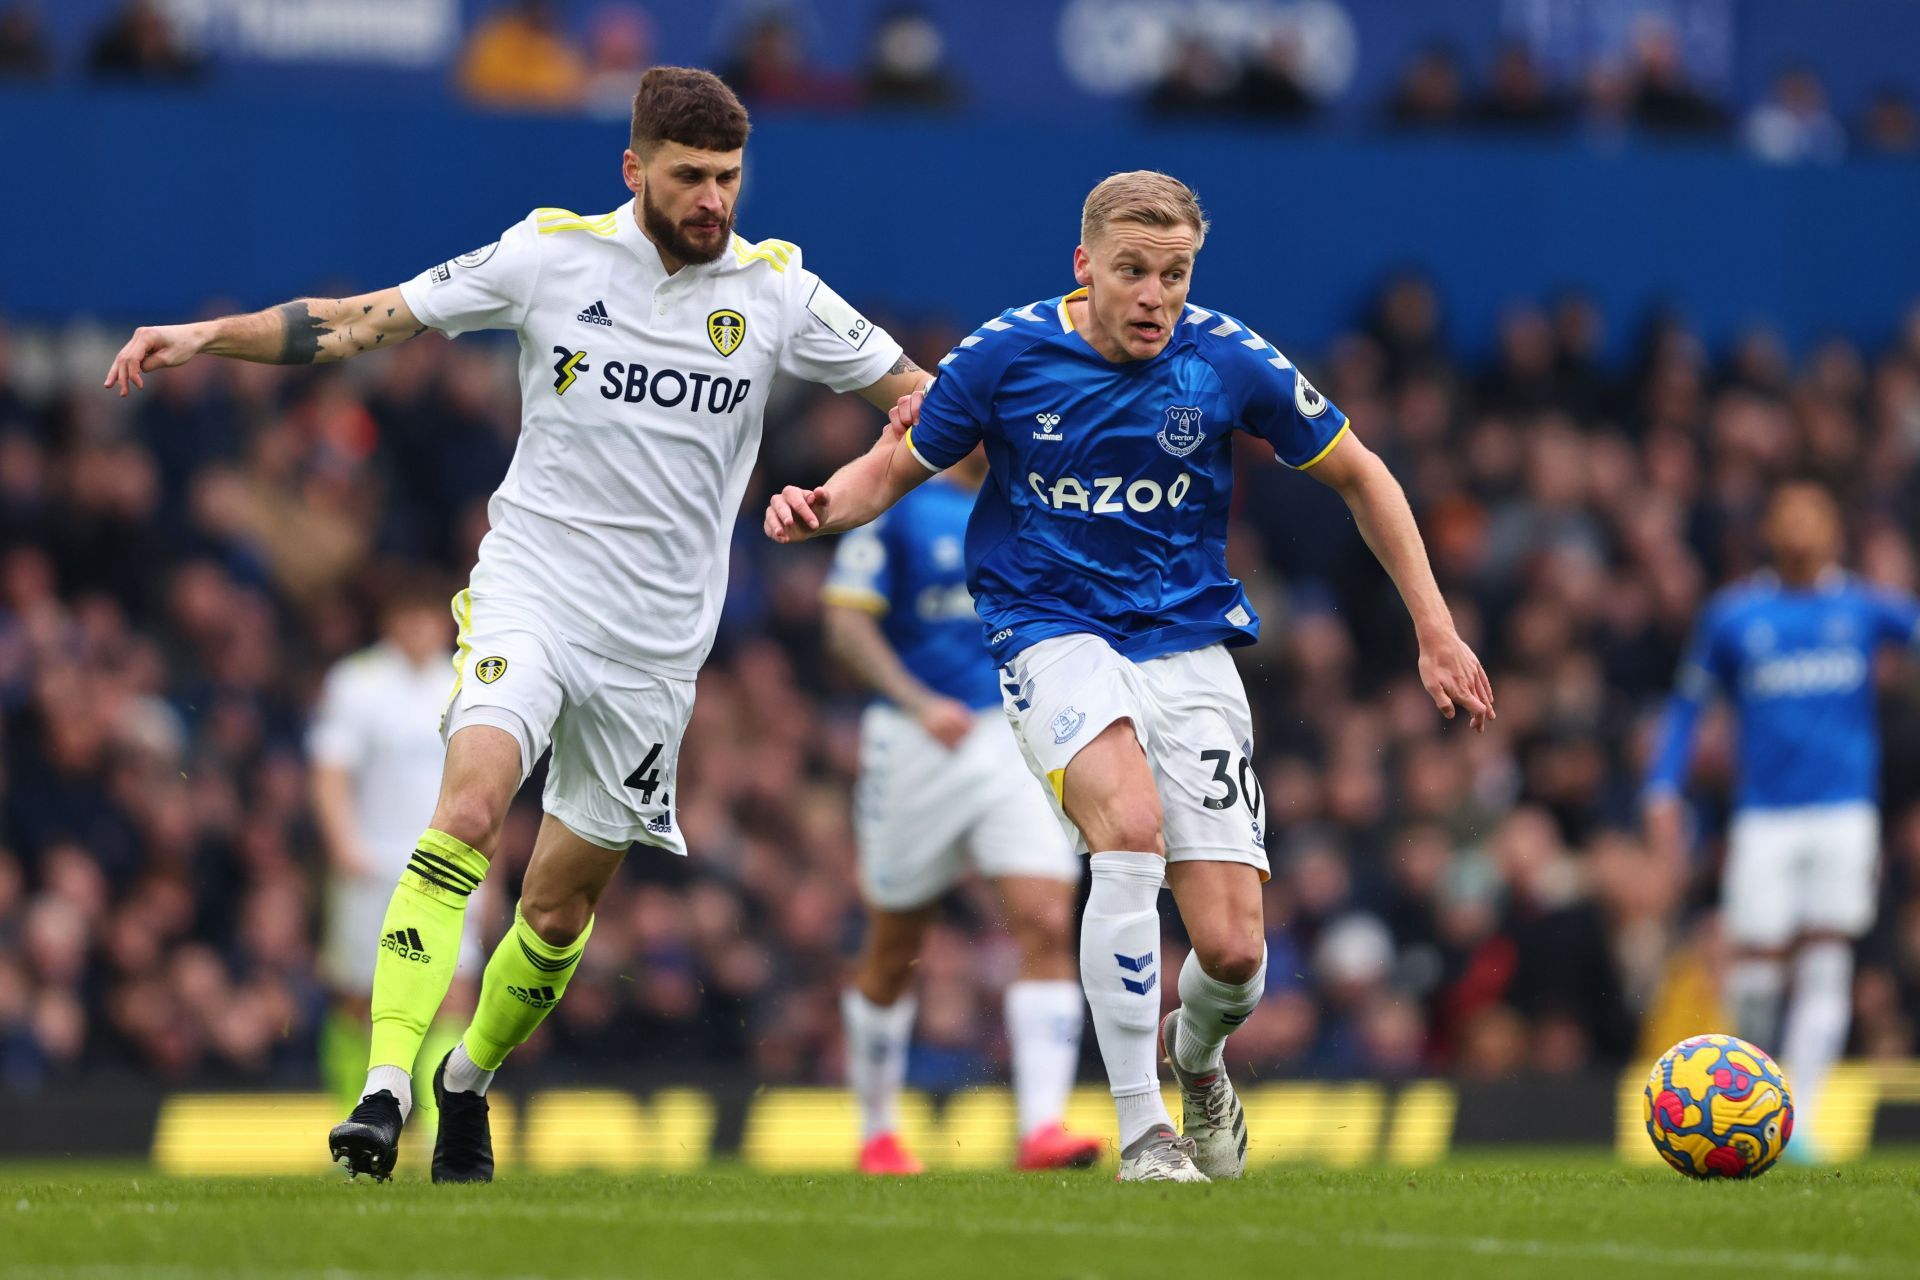 Both Everton and Leeds United are looking to avoid relegation from the Premier League